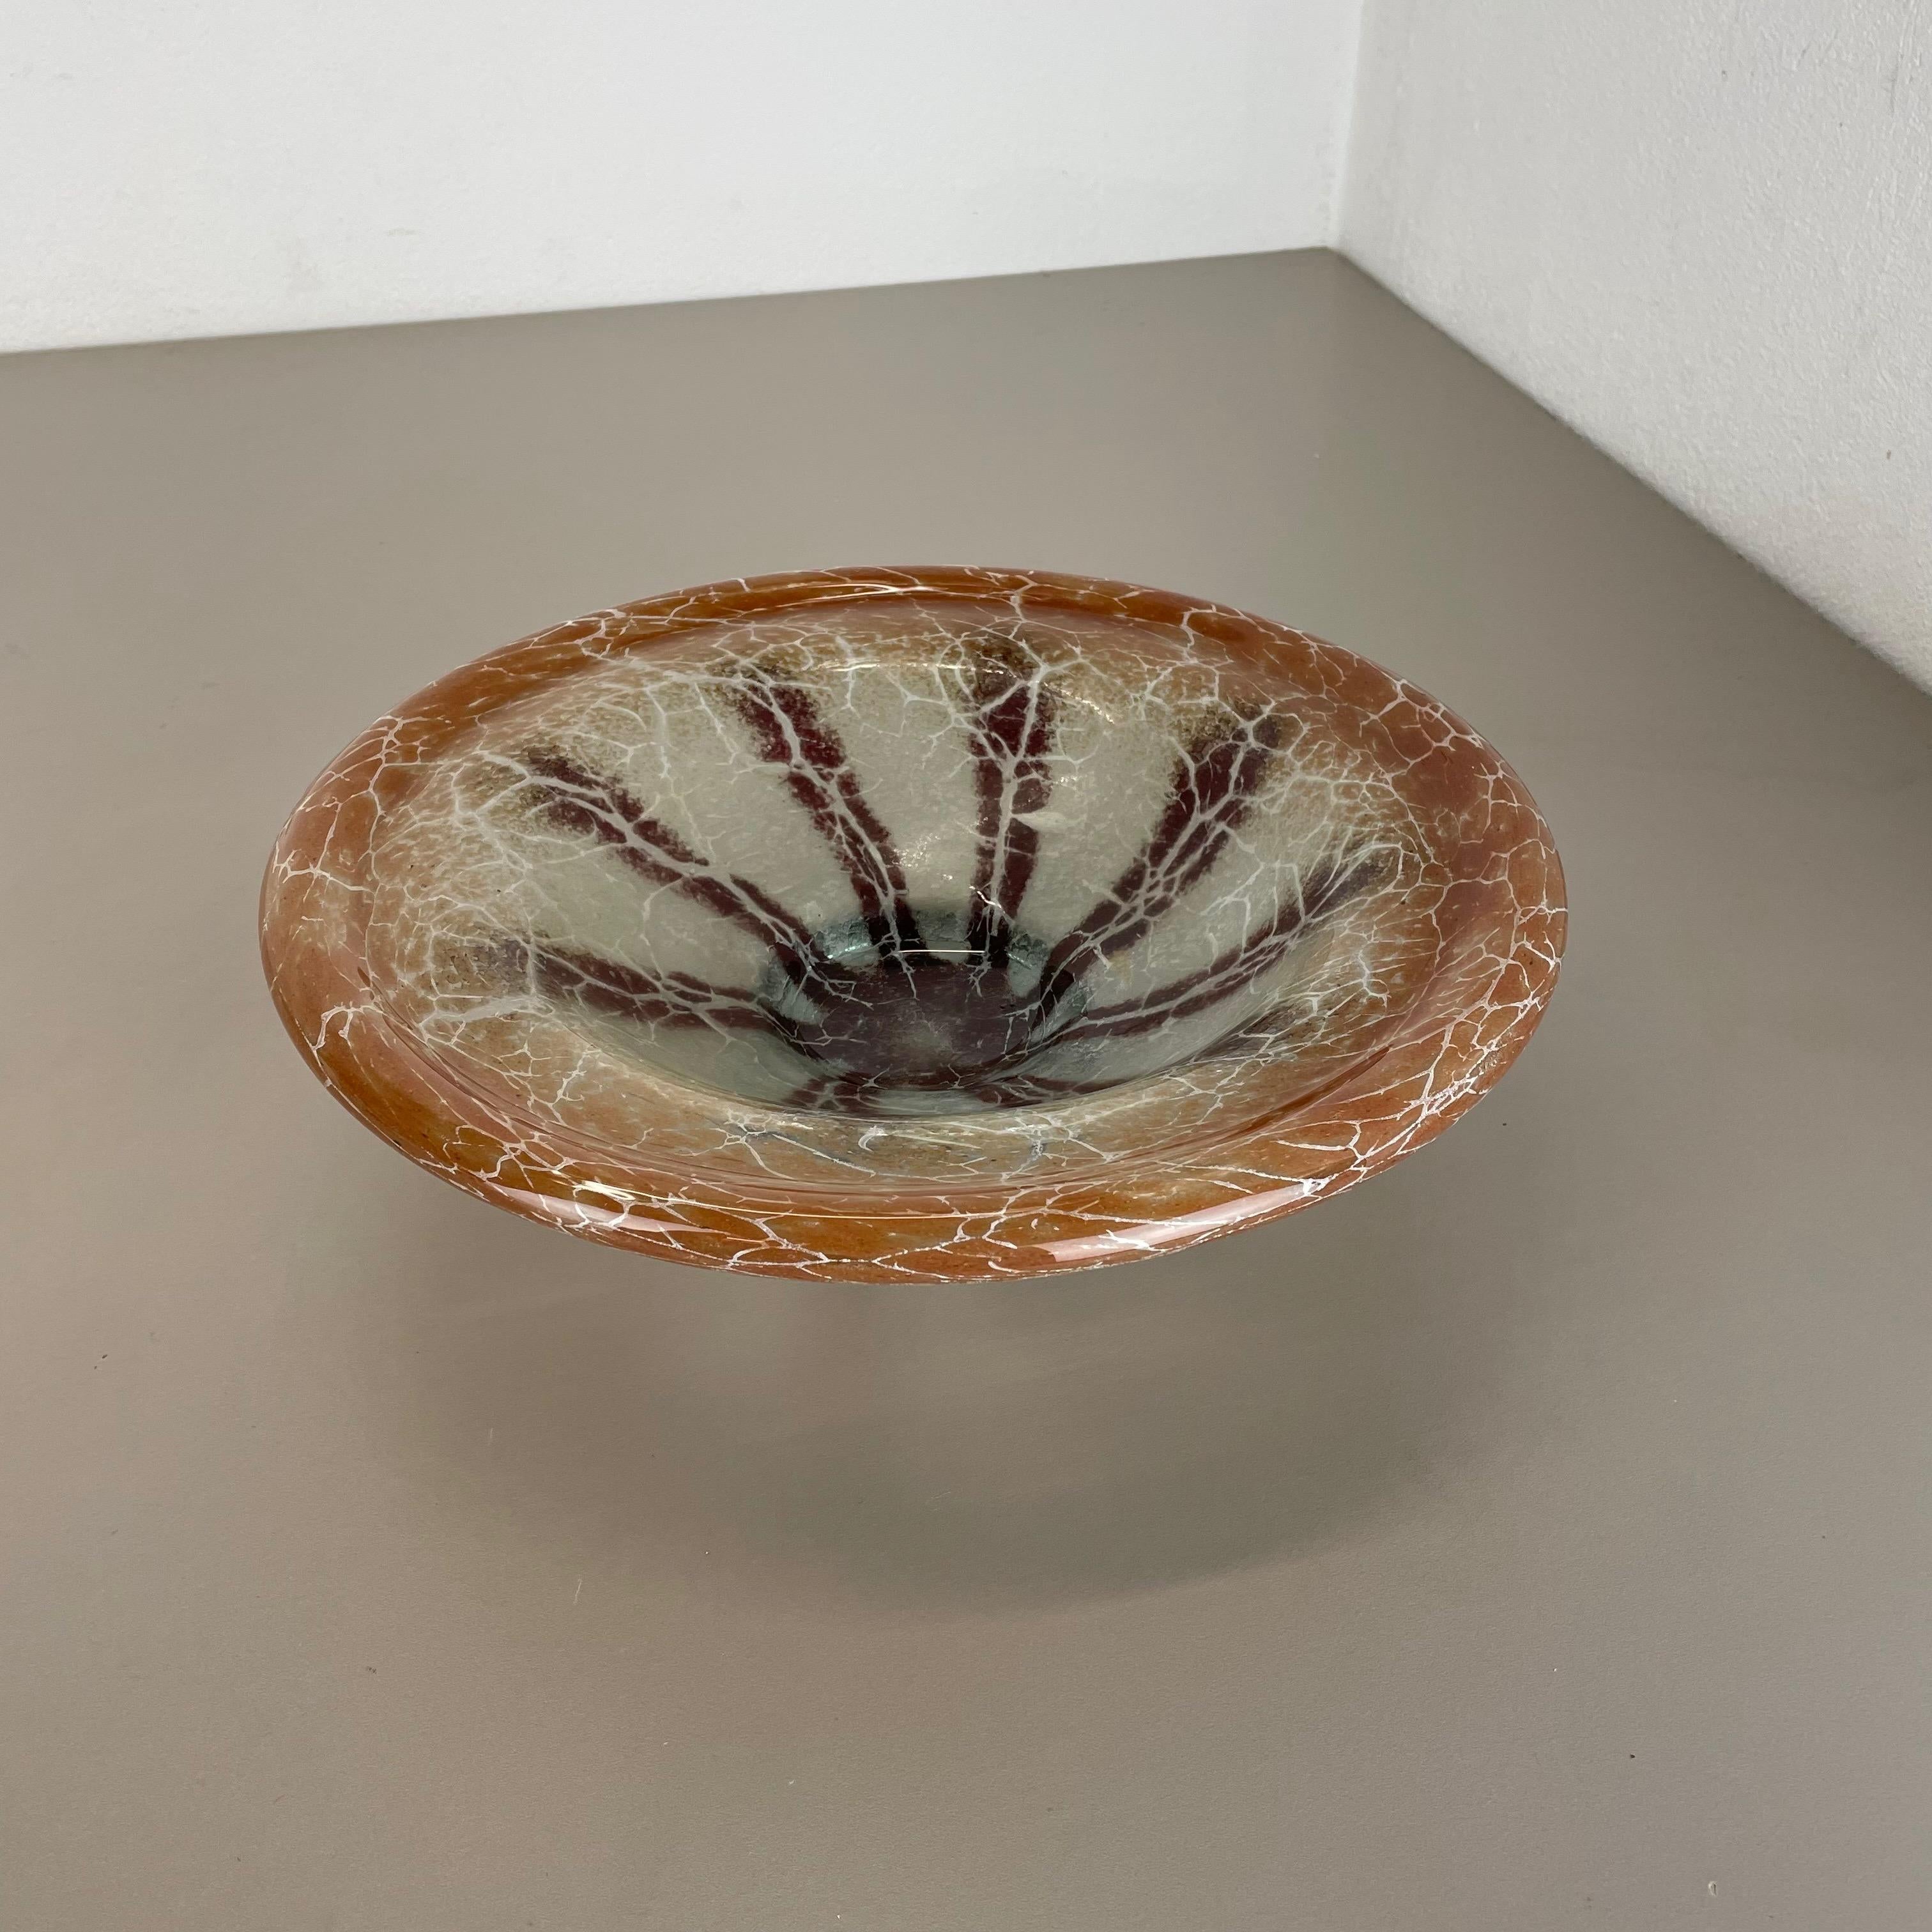 German Glass Bowl by Karl Wiedmann for WMF Ikora, 1930s Baushaus Art Deco In Good Condition For Sale In Kirchlengern, DE